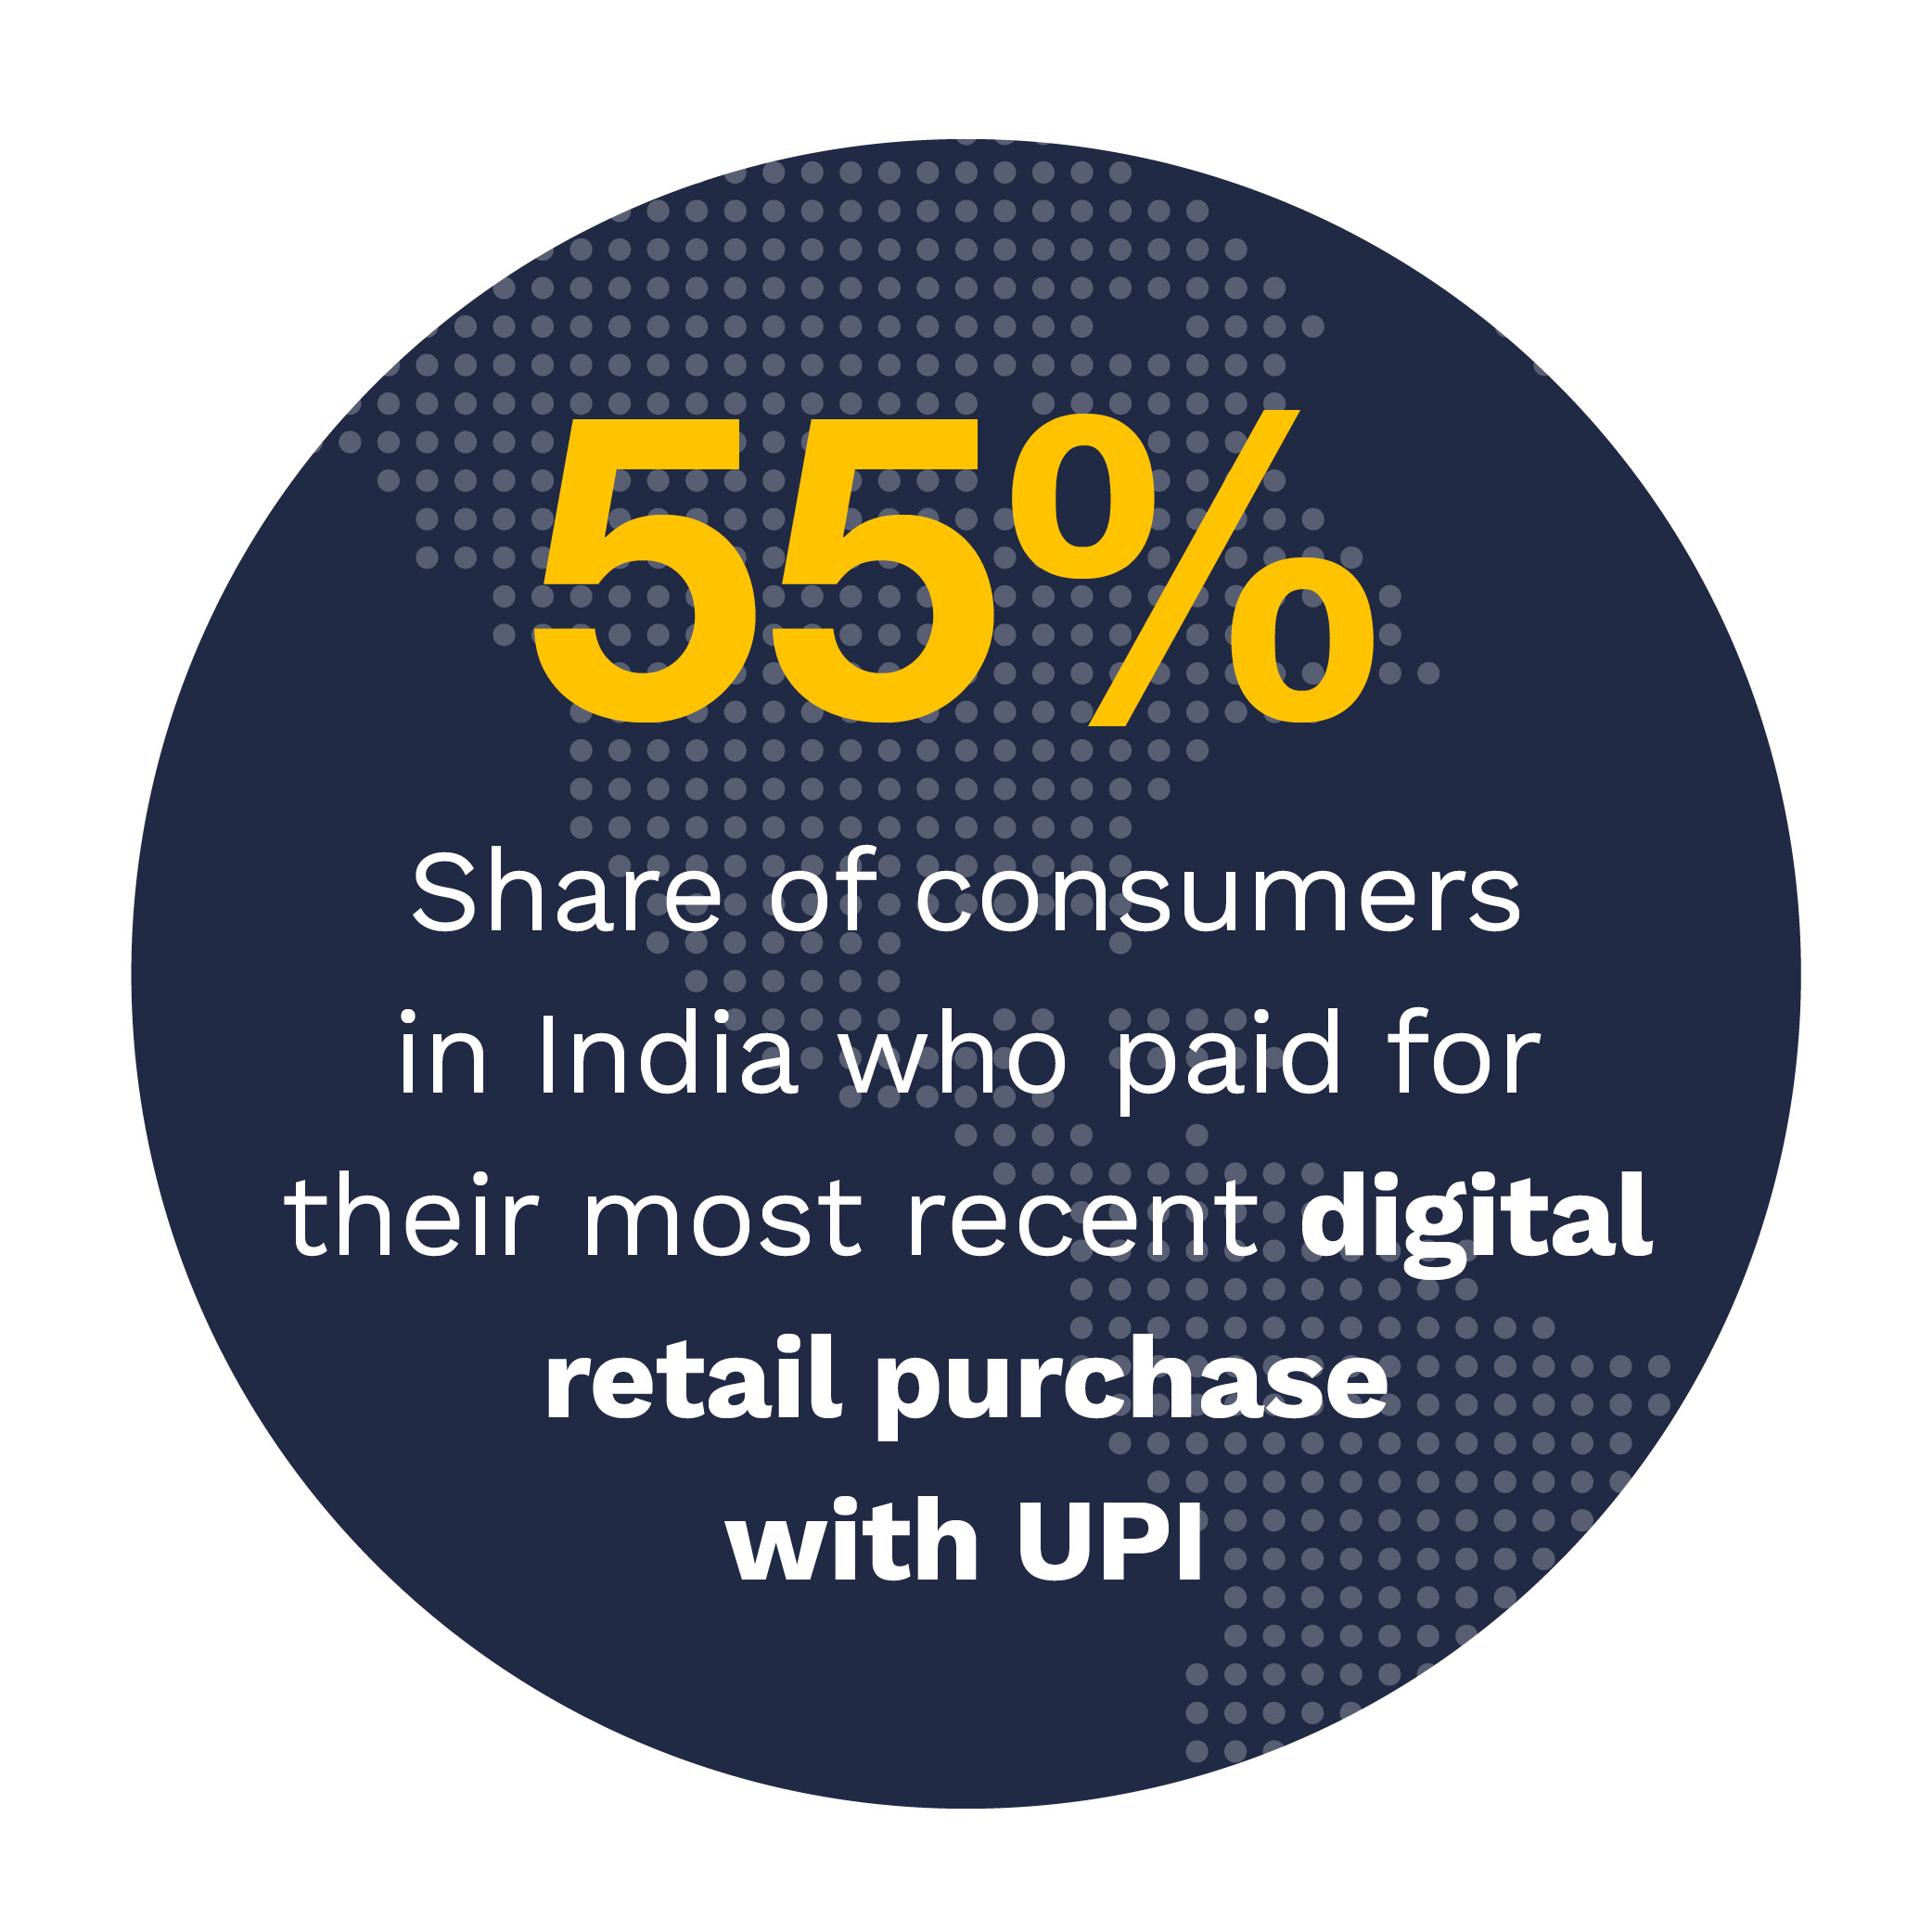 55% Share of consumers in India who paid for their most recent digital retail purchase with UPI